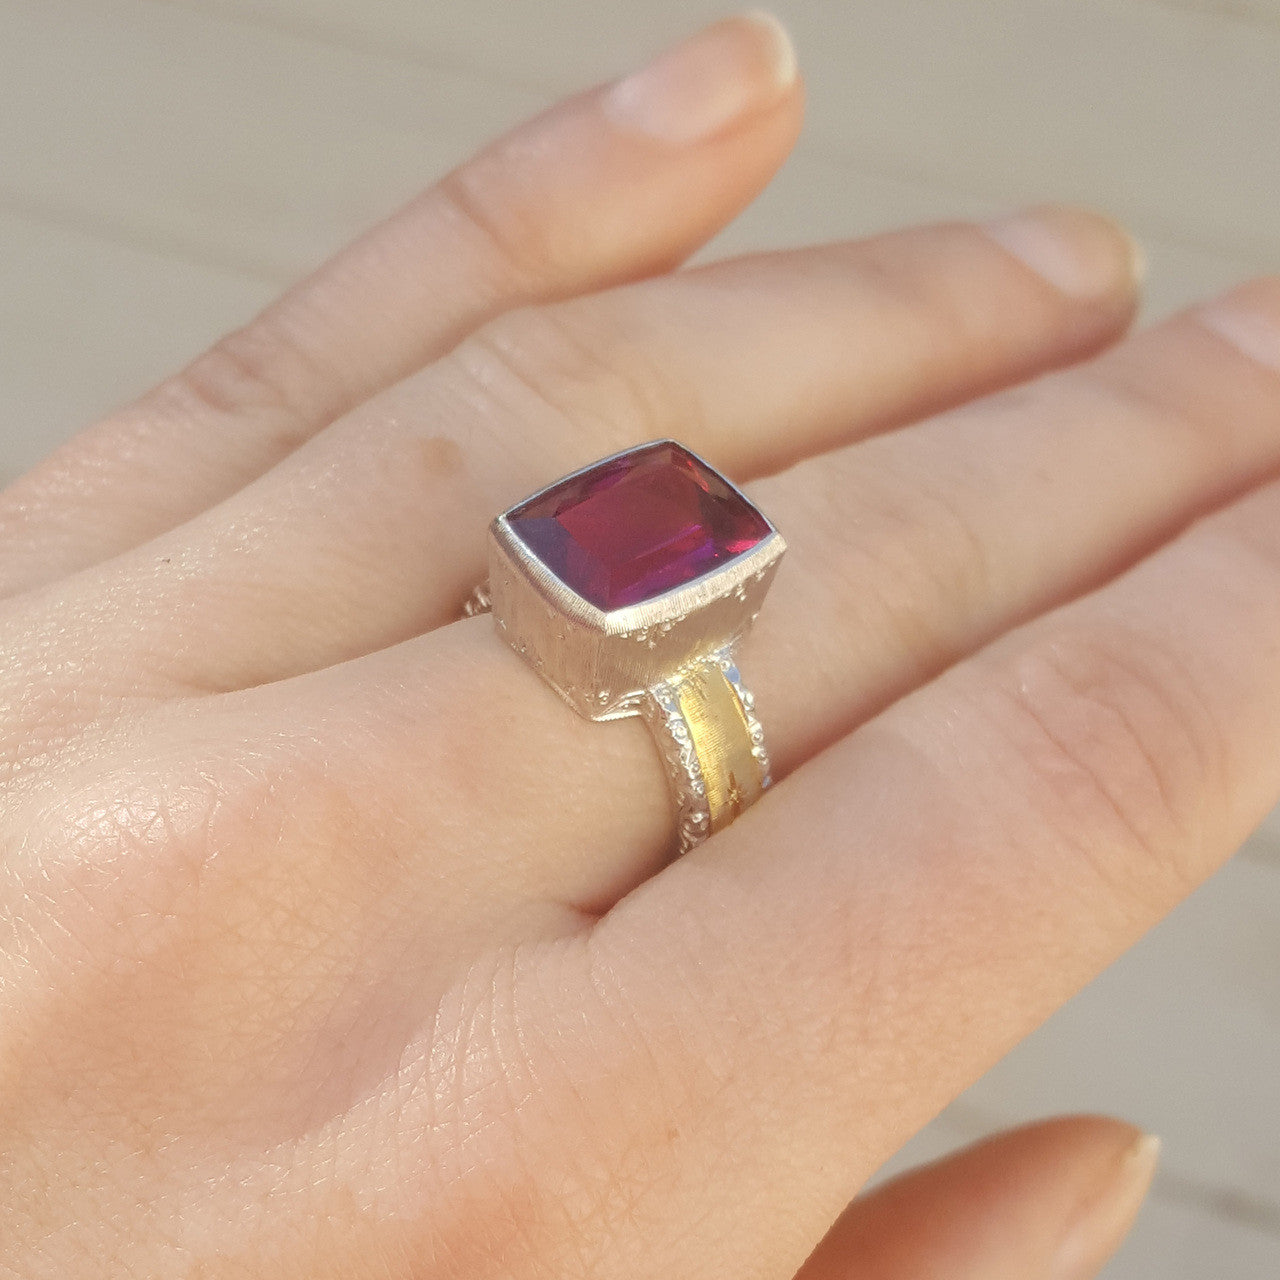 Rubellite Tourmaline 18kt Sienna Ring made in Florence, Italy by Cynthia Scott Jewelry